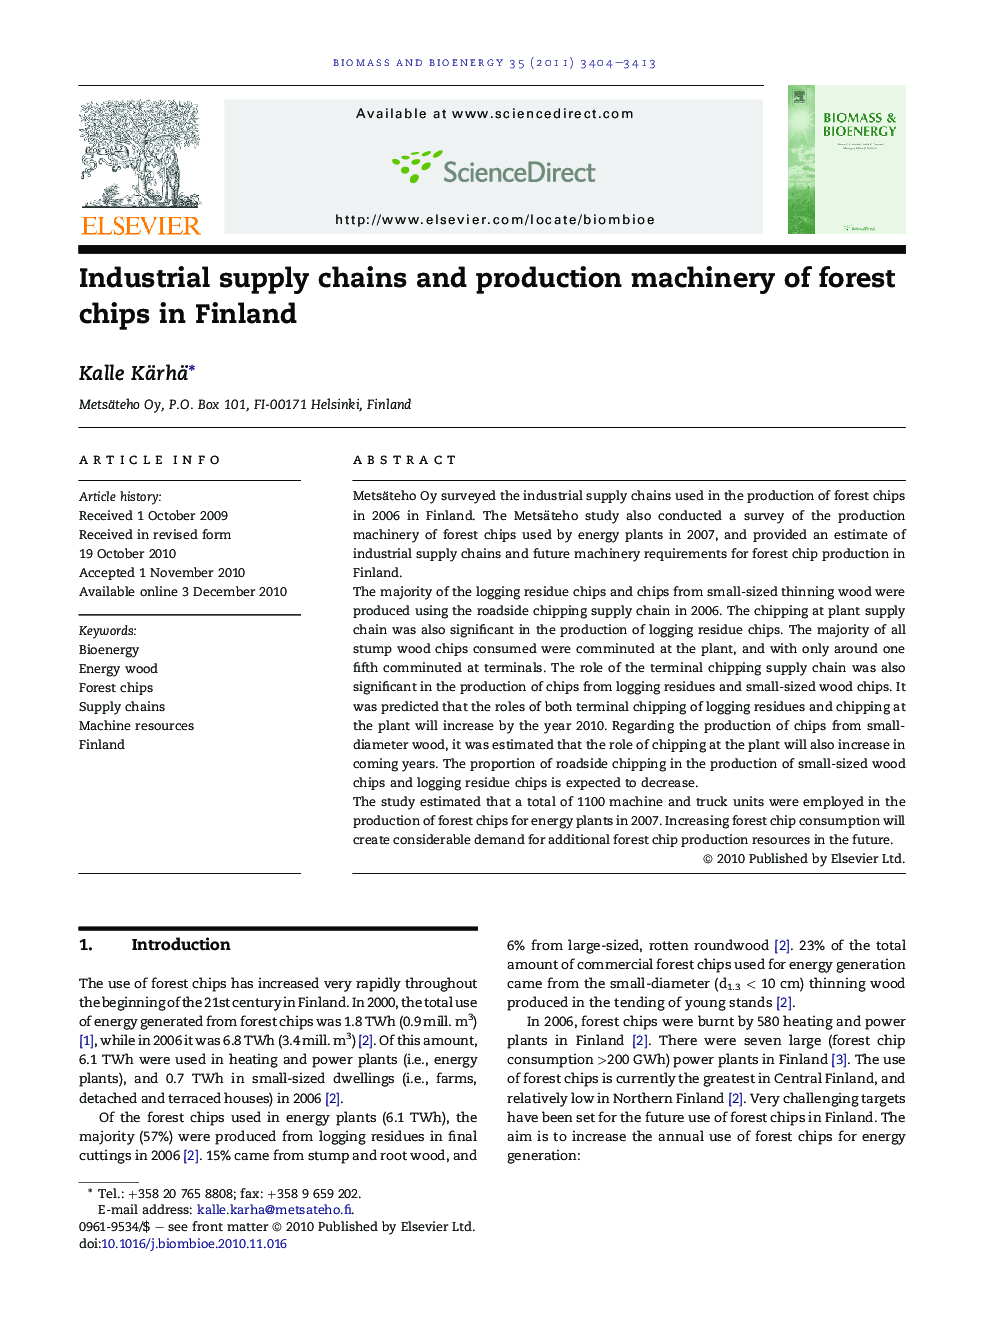 Industrial supply chains and production machinery of forest chips in Finland